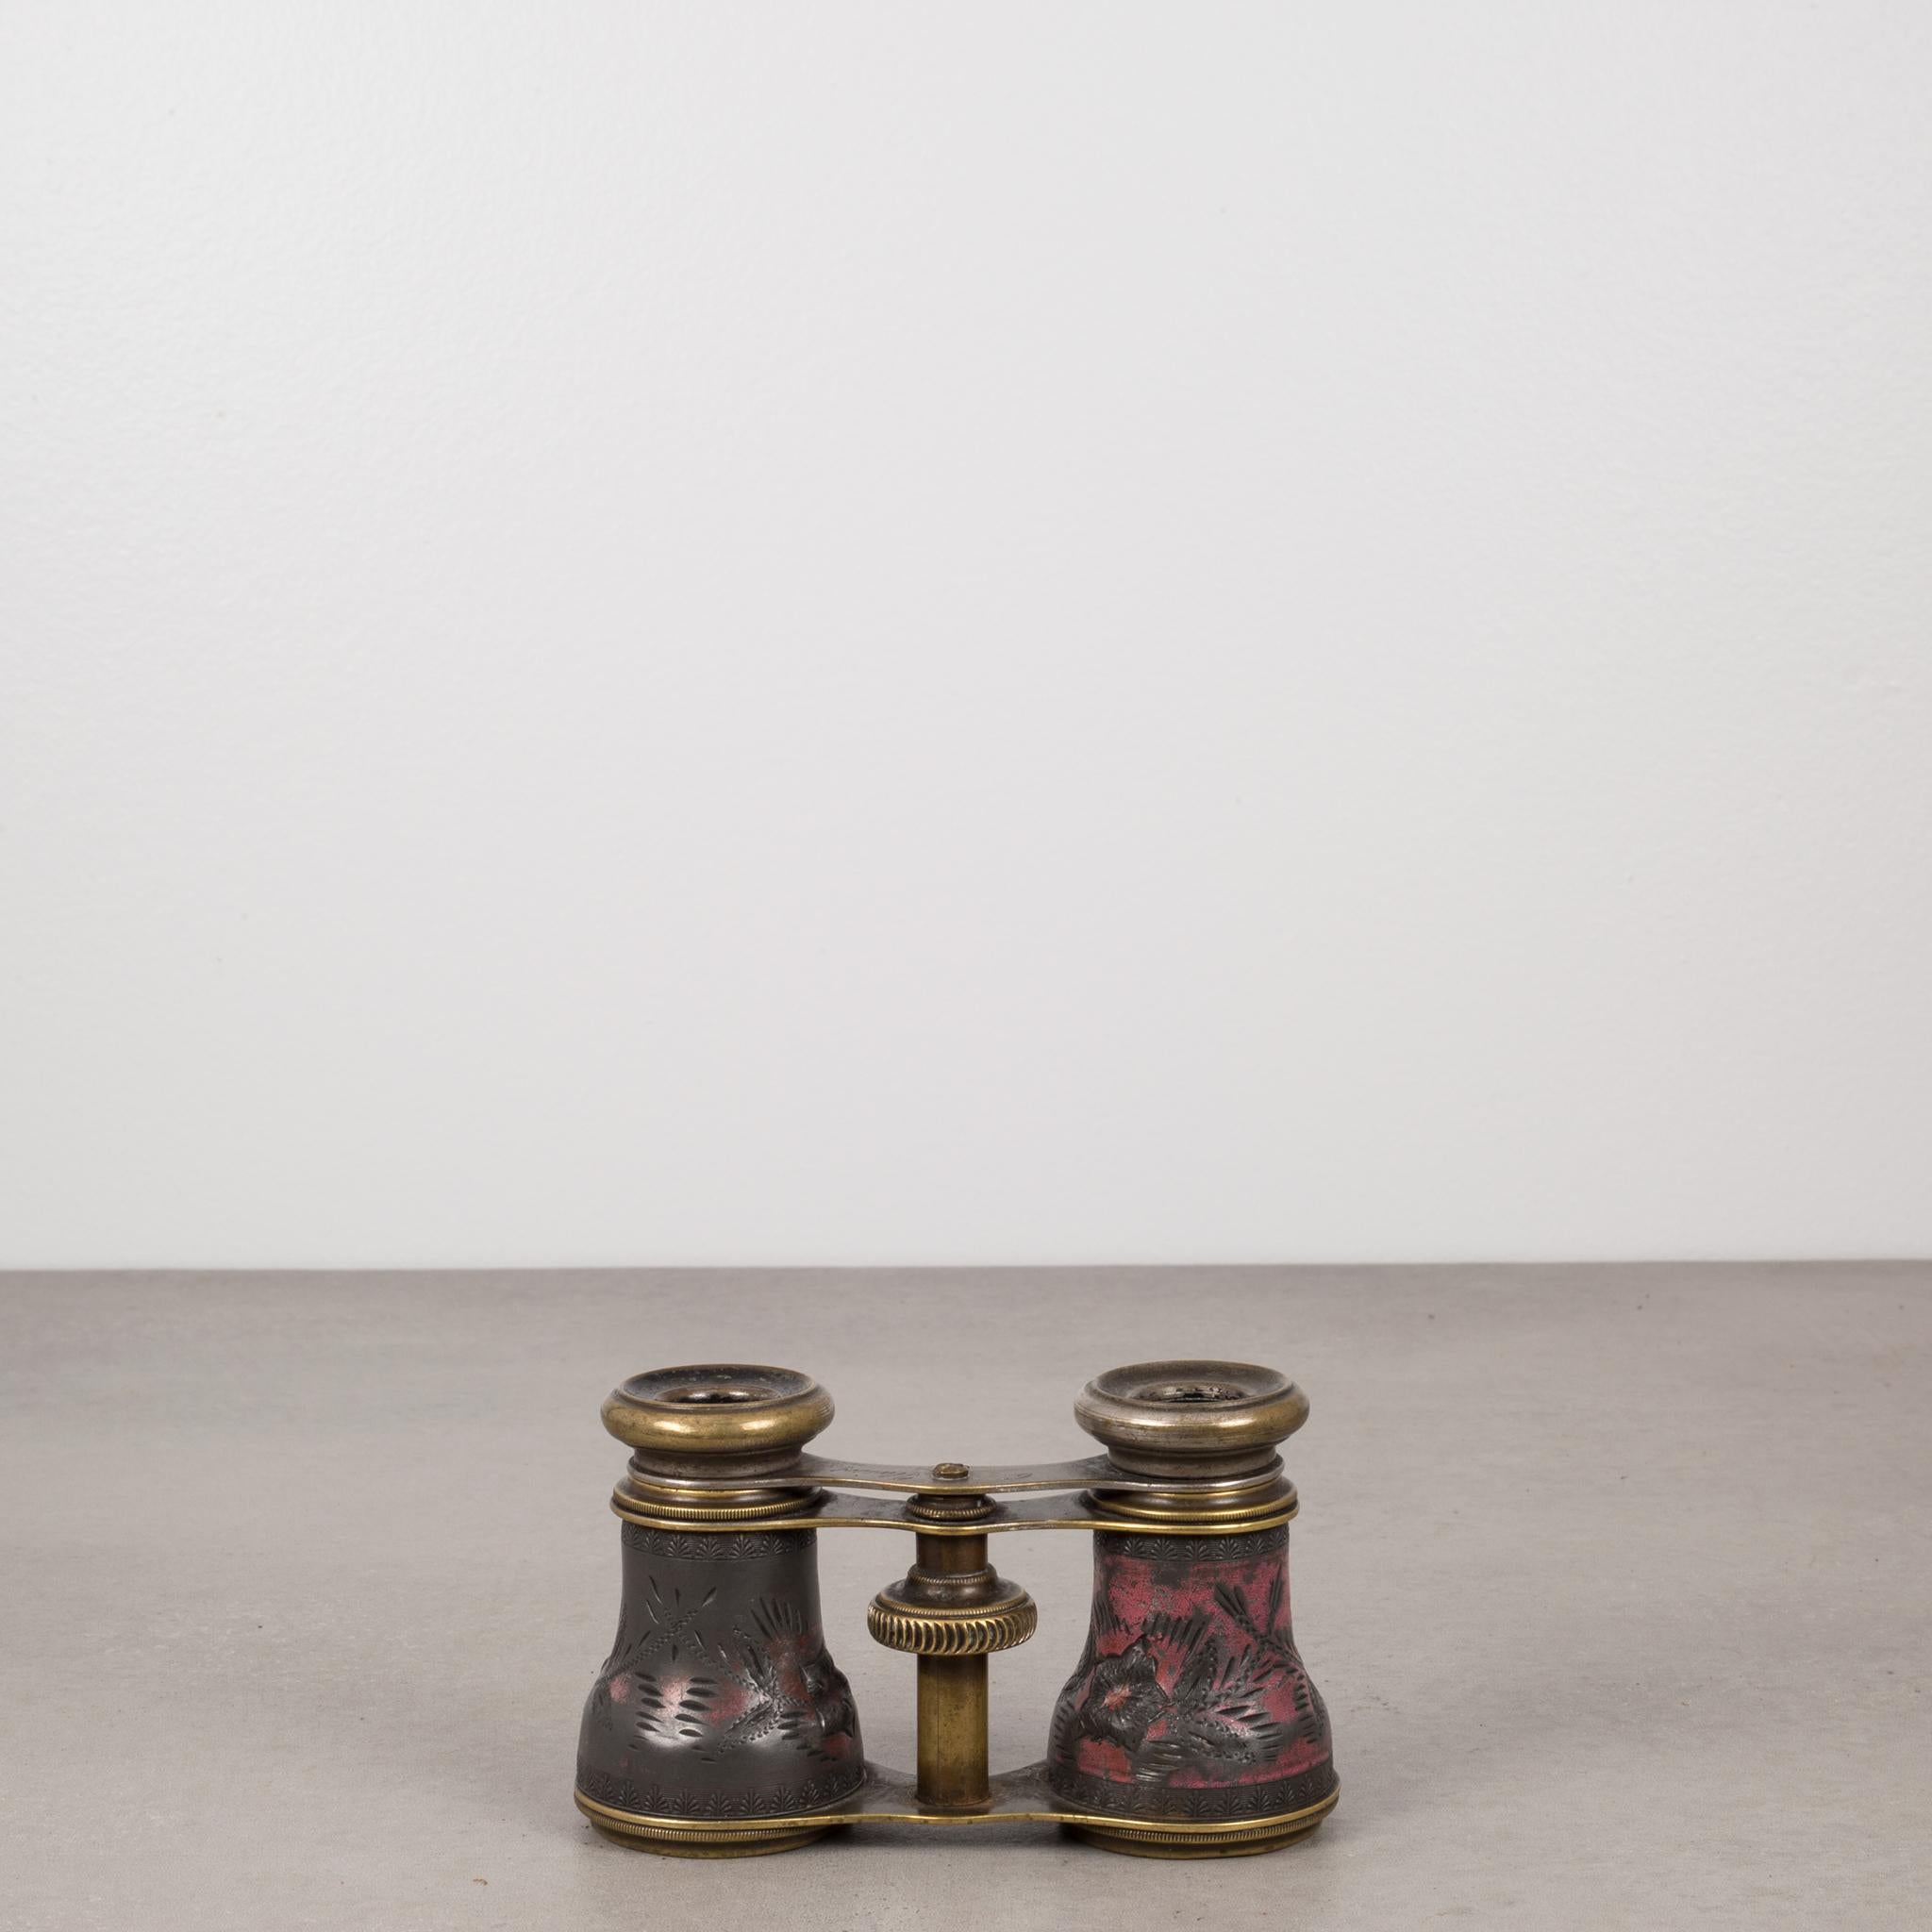 Lovely pair of brass binoculars with embossed metal. Made in France, circa 1880s. The metal is embossed with flowers and leaves and has some original red paint.
The top centre has 